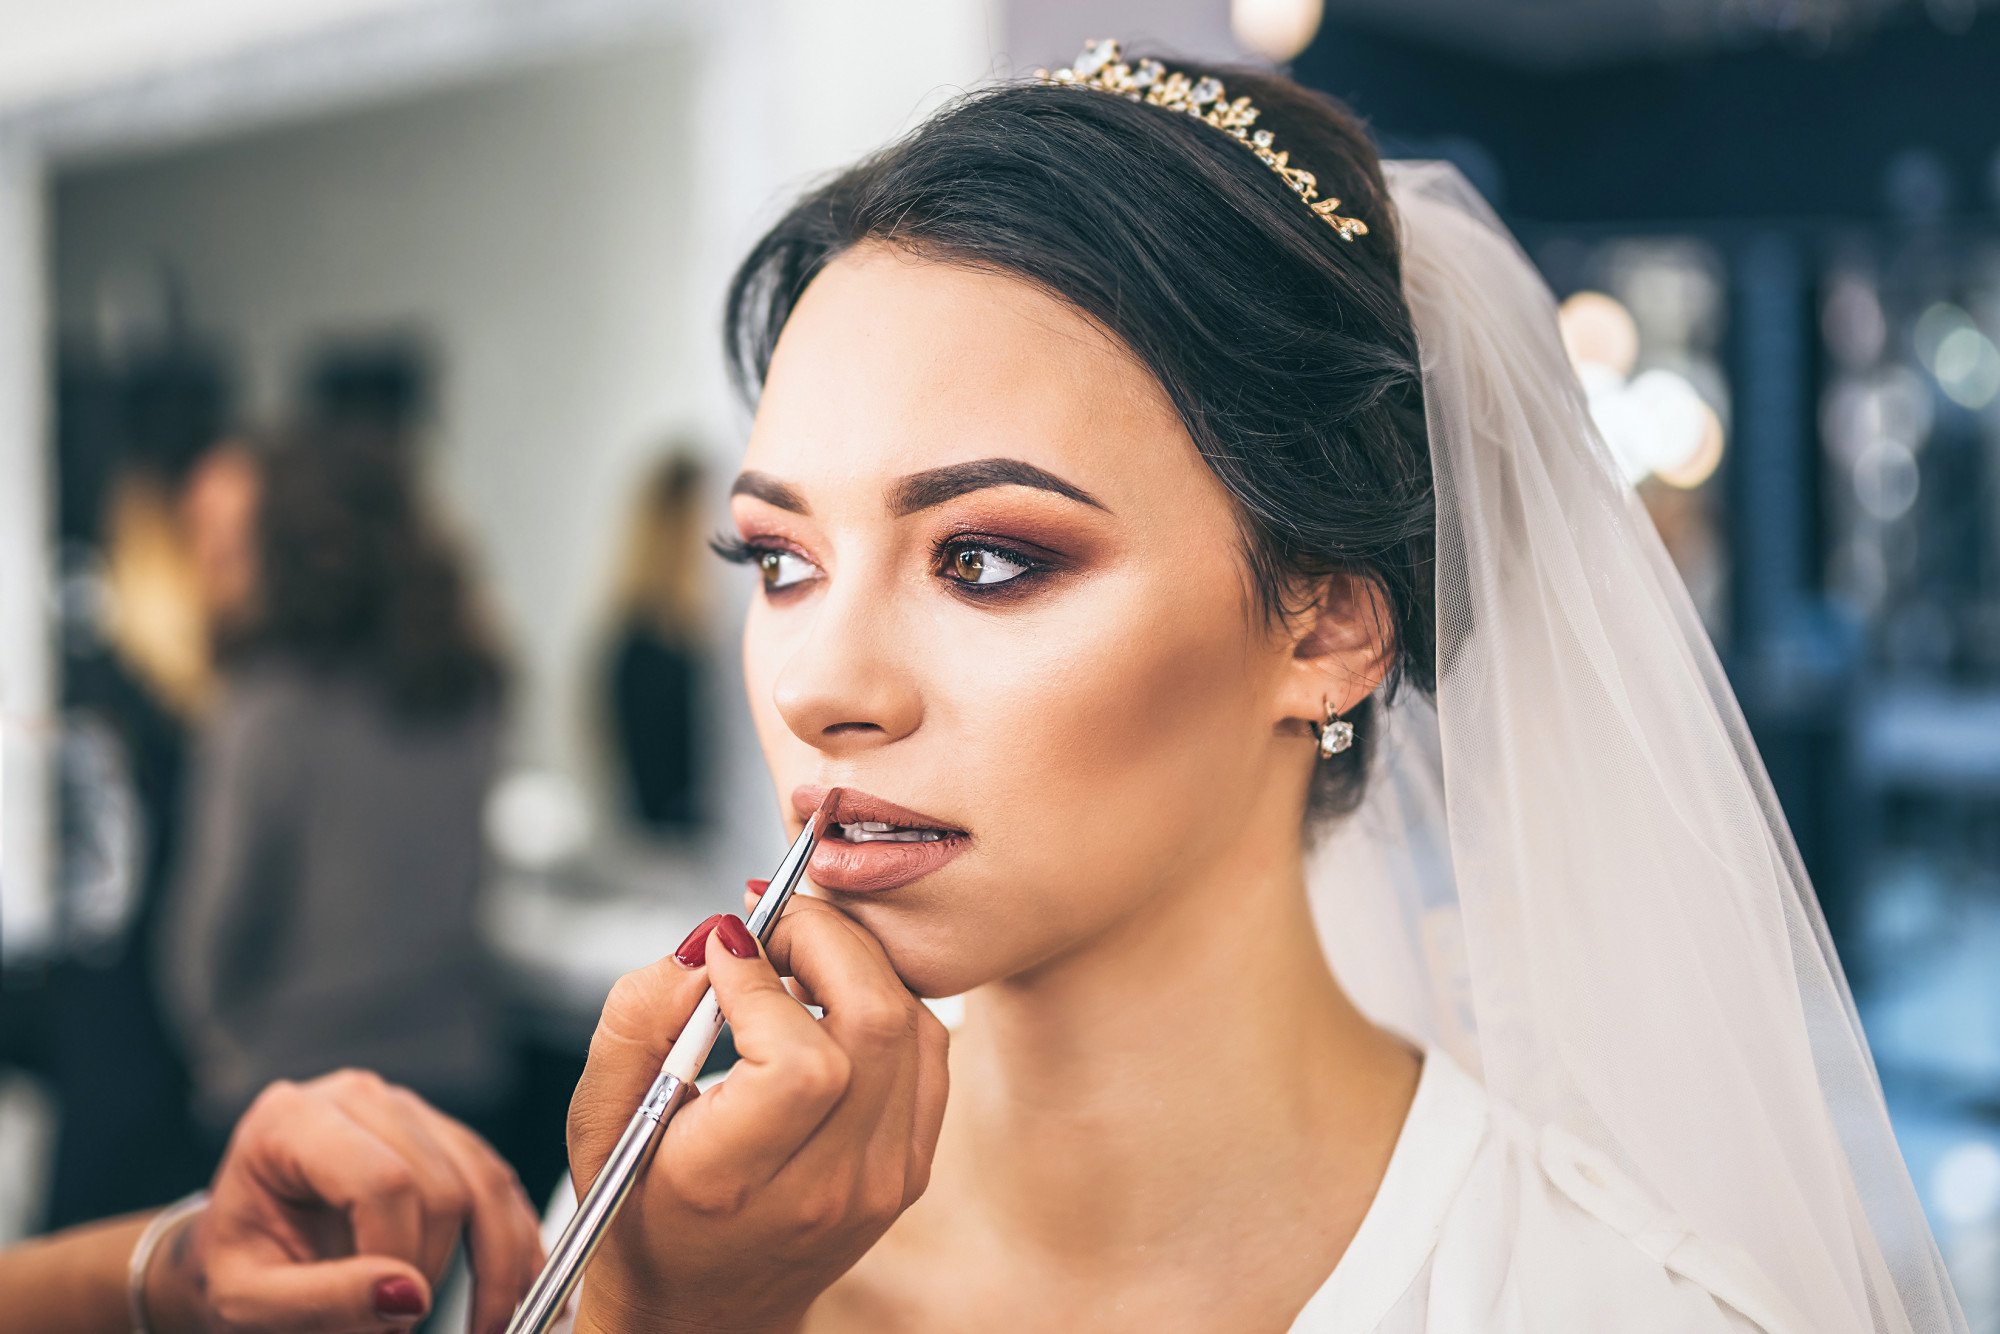 Makeup for Photos: 4 Tips for Your Wedding Day